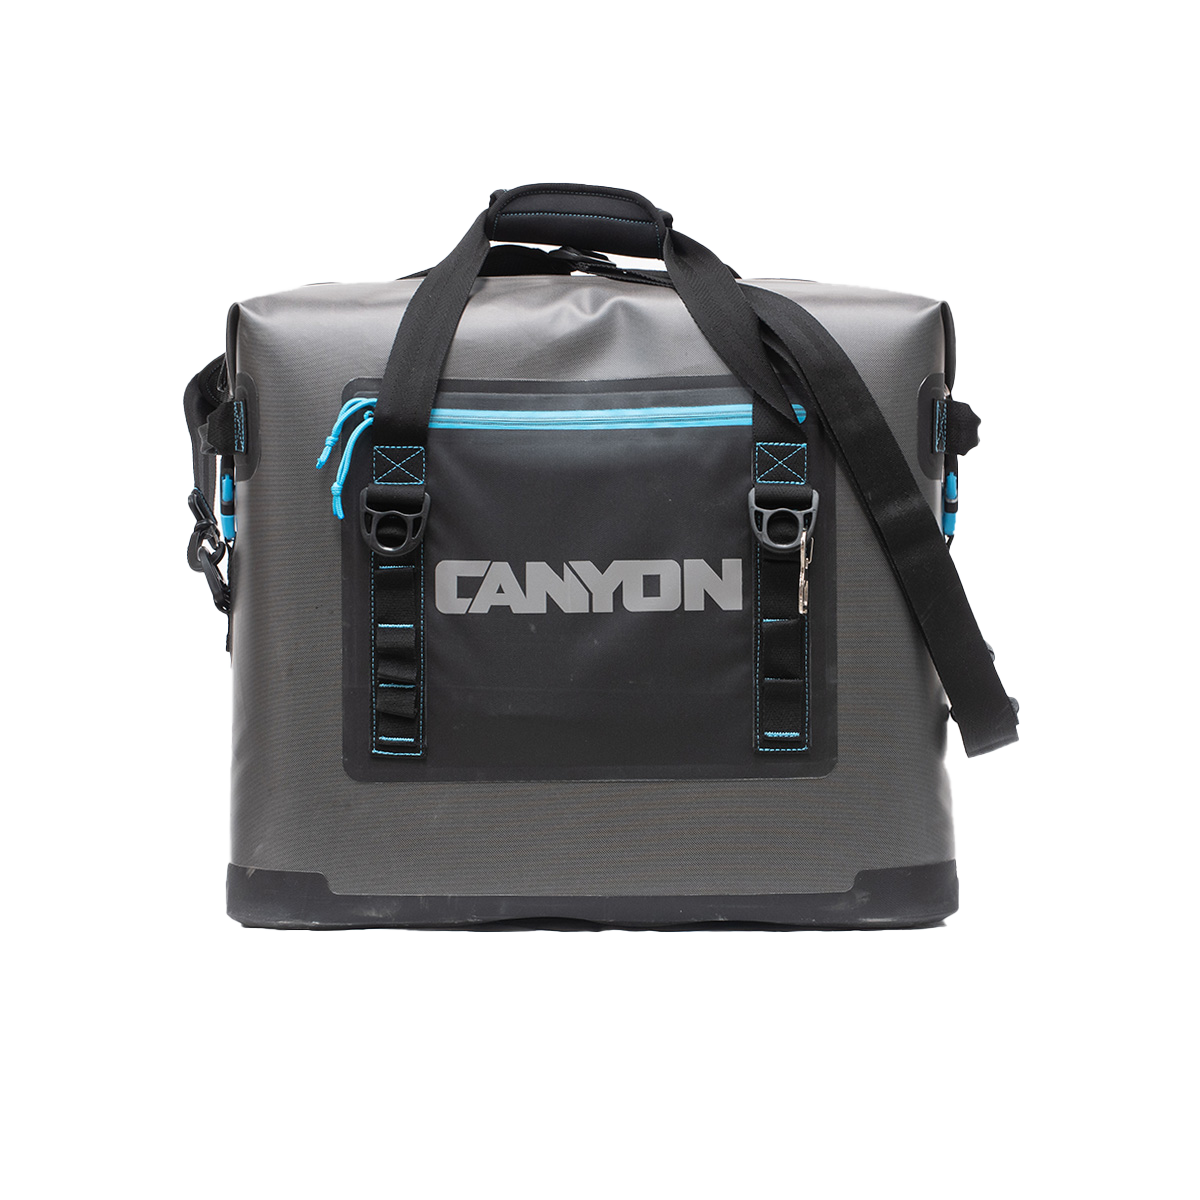 Featuring the Nomad Series Soft Cooler cooler manufactured by Canyon shown here from a second angle.